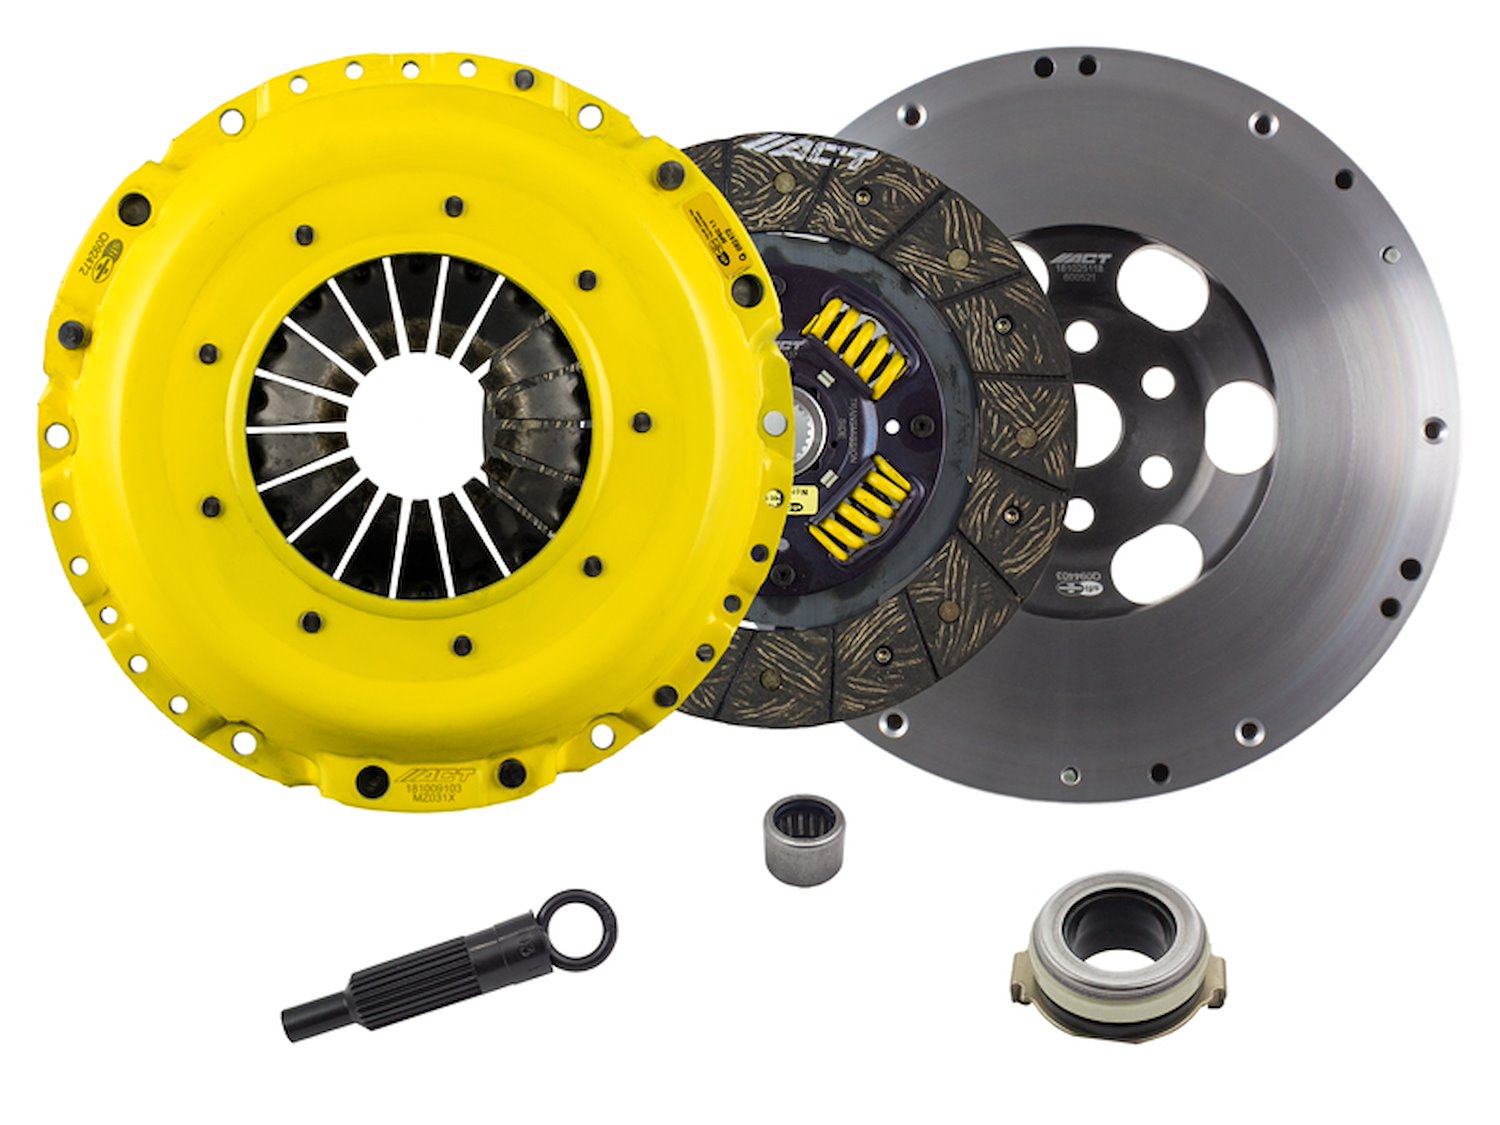 XT/Performance Street Sprung Transmission Clutch Kit Fits Select Ford/Lincoln/Mercury/Mazda